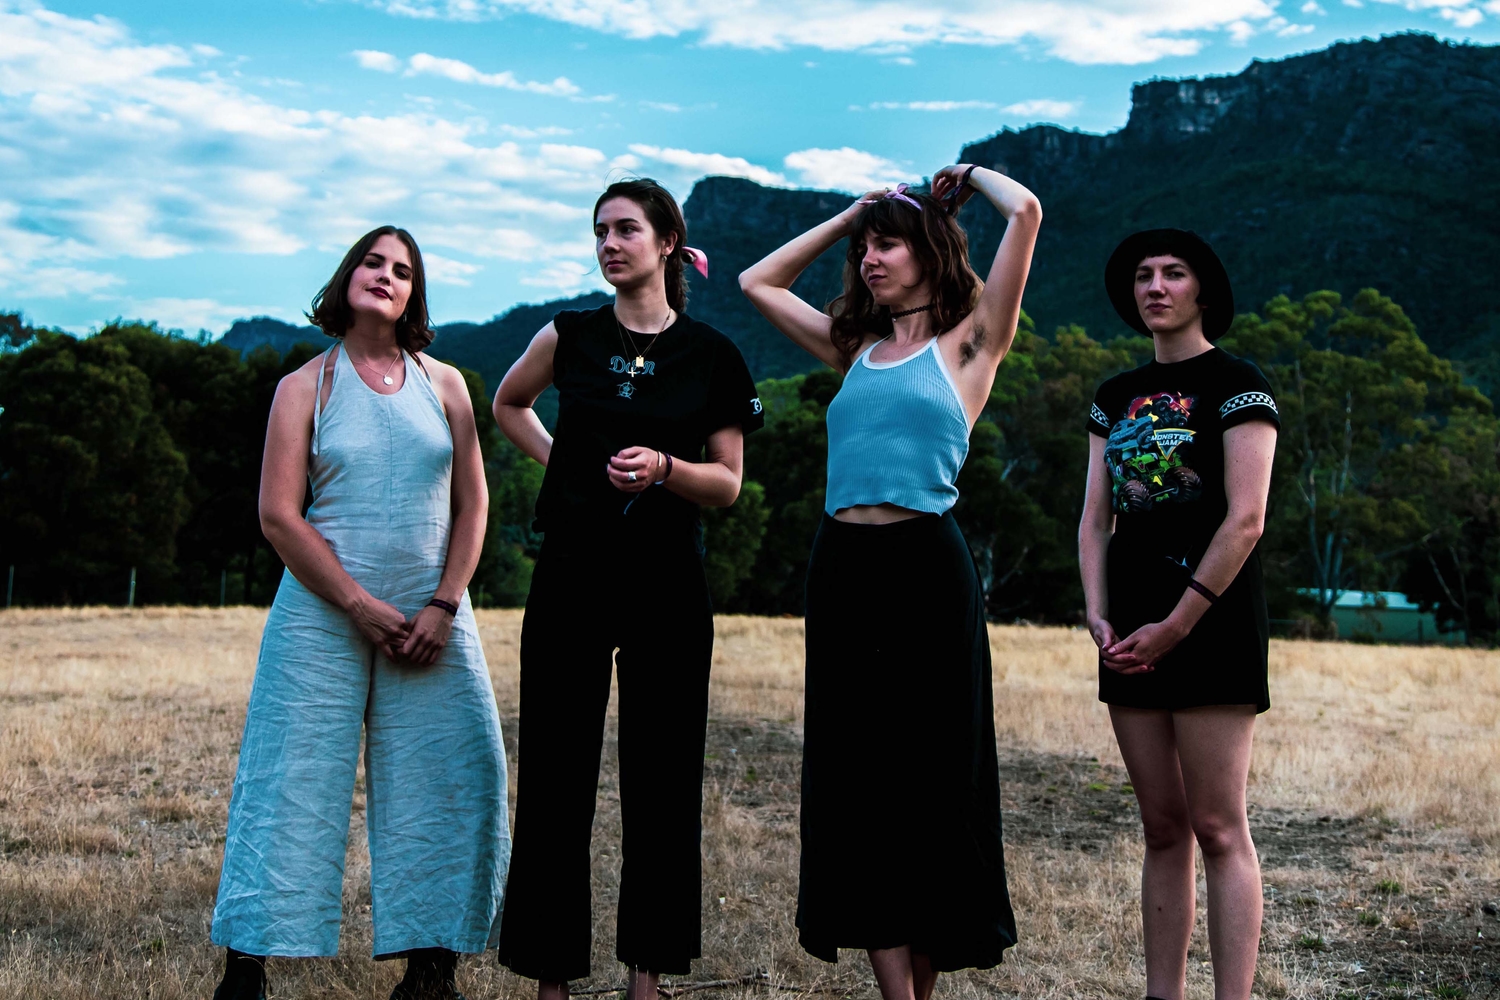 Body Type announce EP2, share ‘Stingray’ video